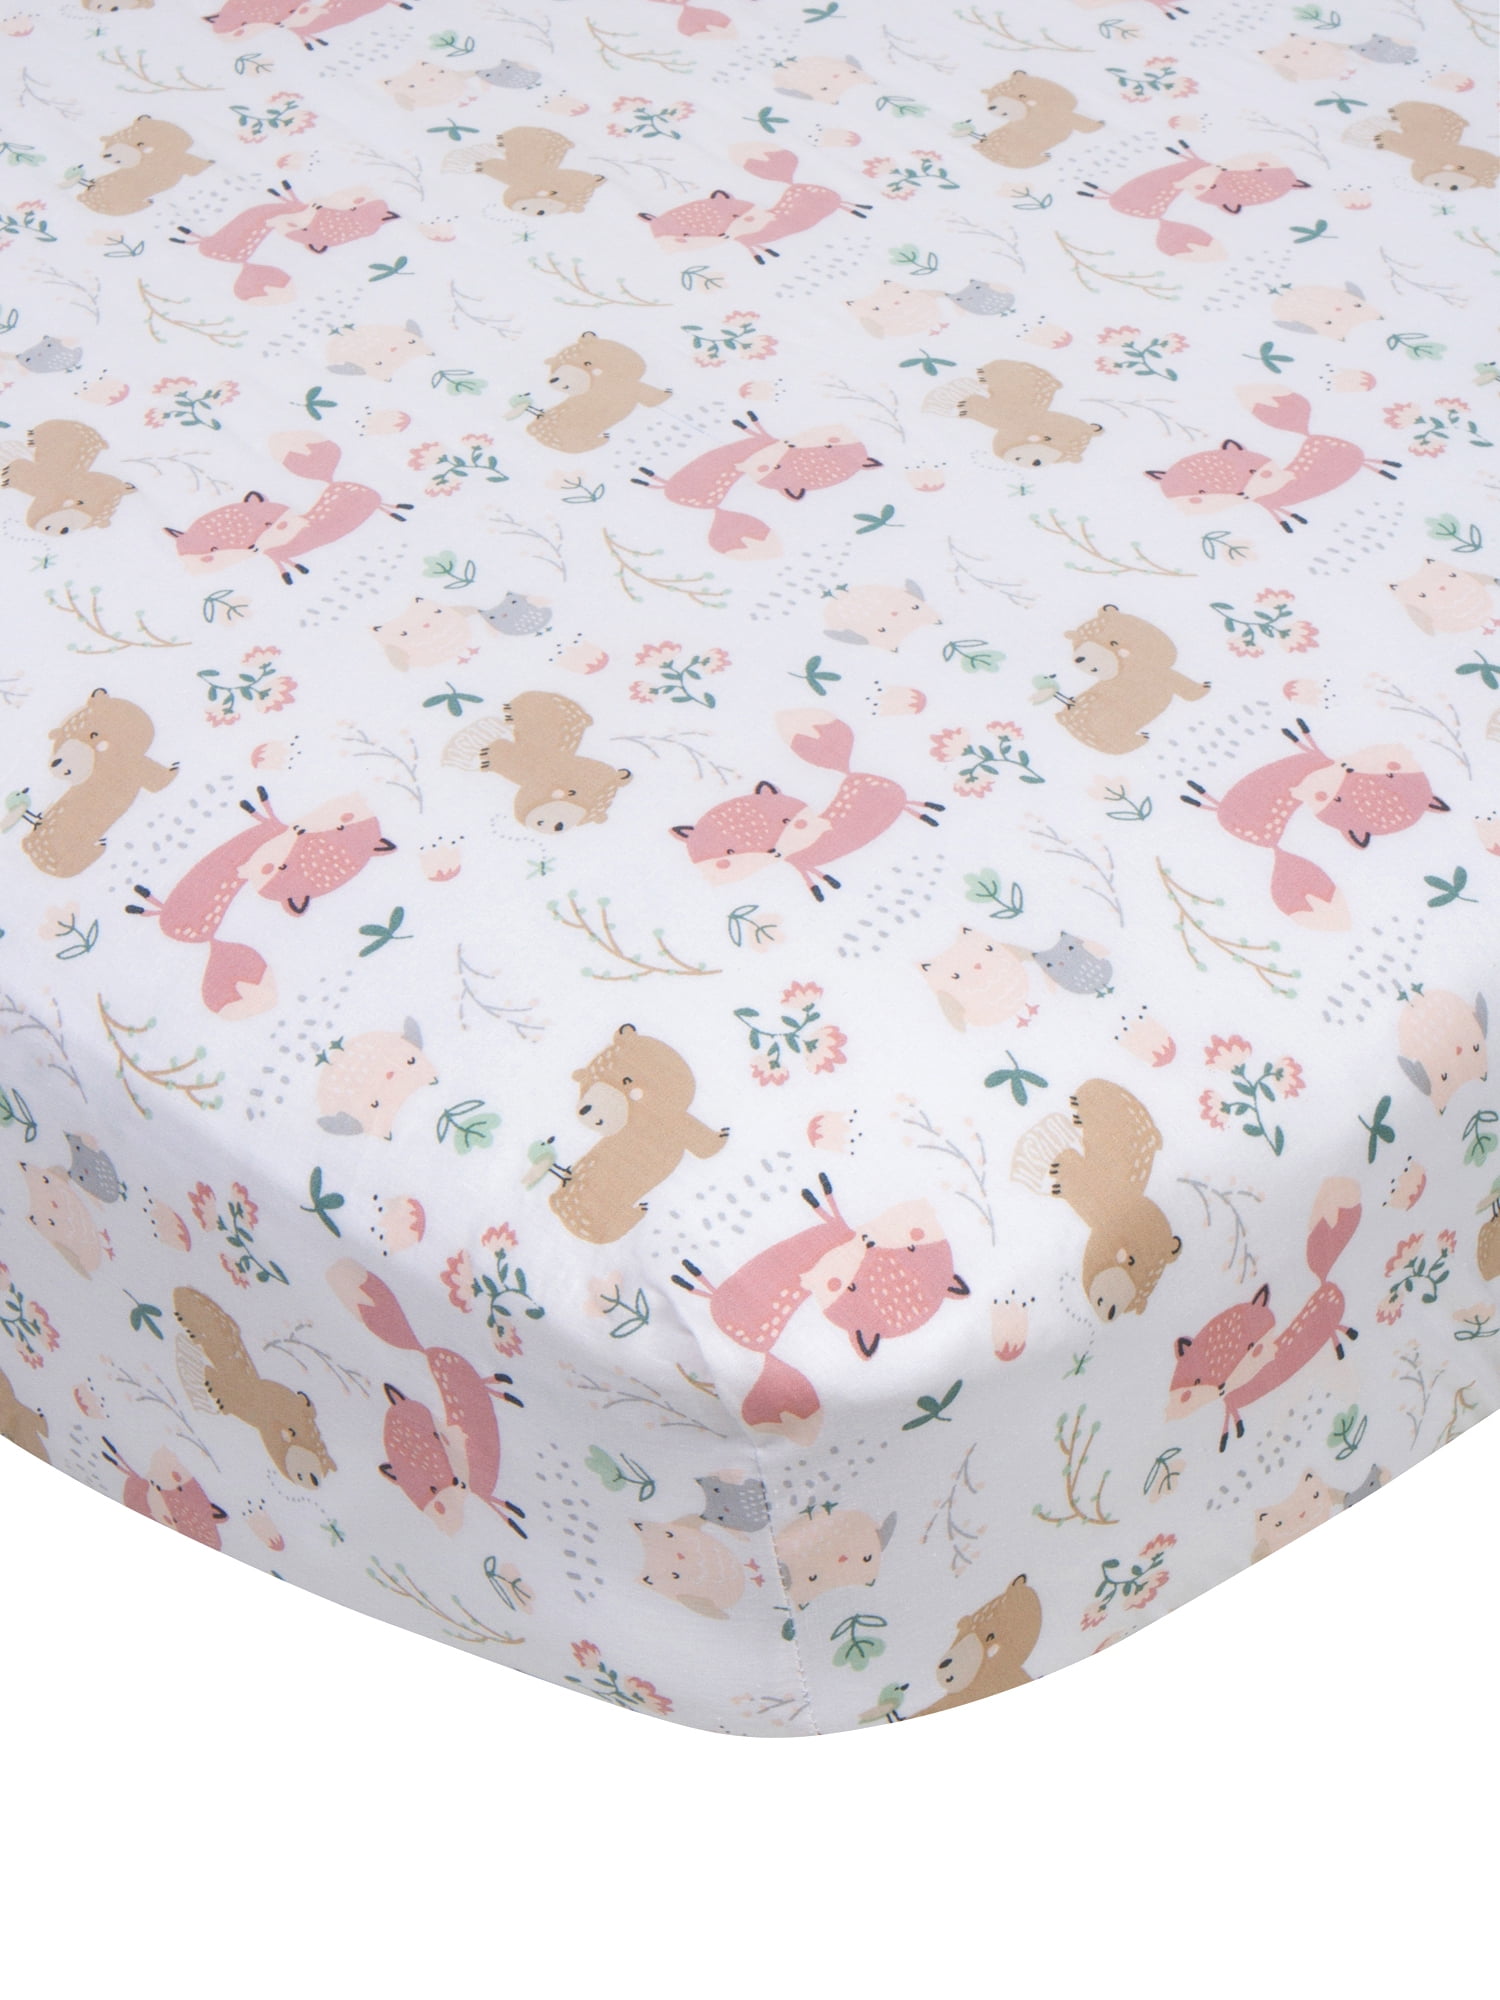 Baby Girl Floral Fitted Crib Sheet Toddler Bed Mattresses fits Standard Crib 